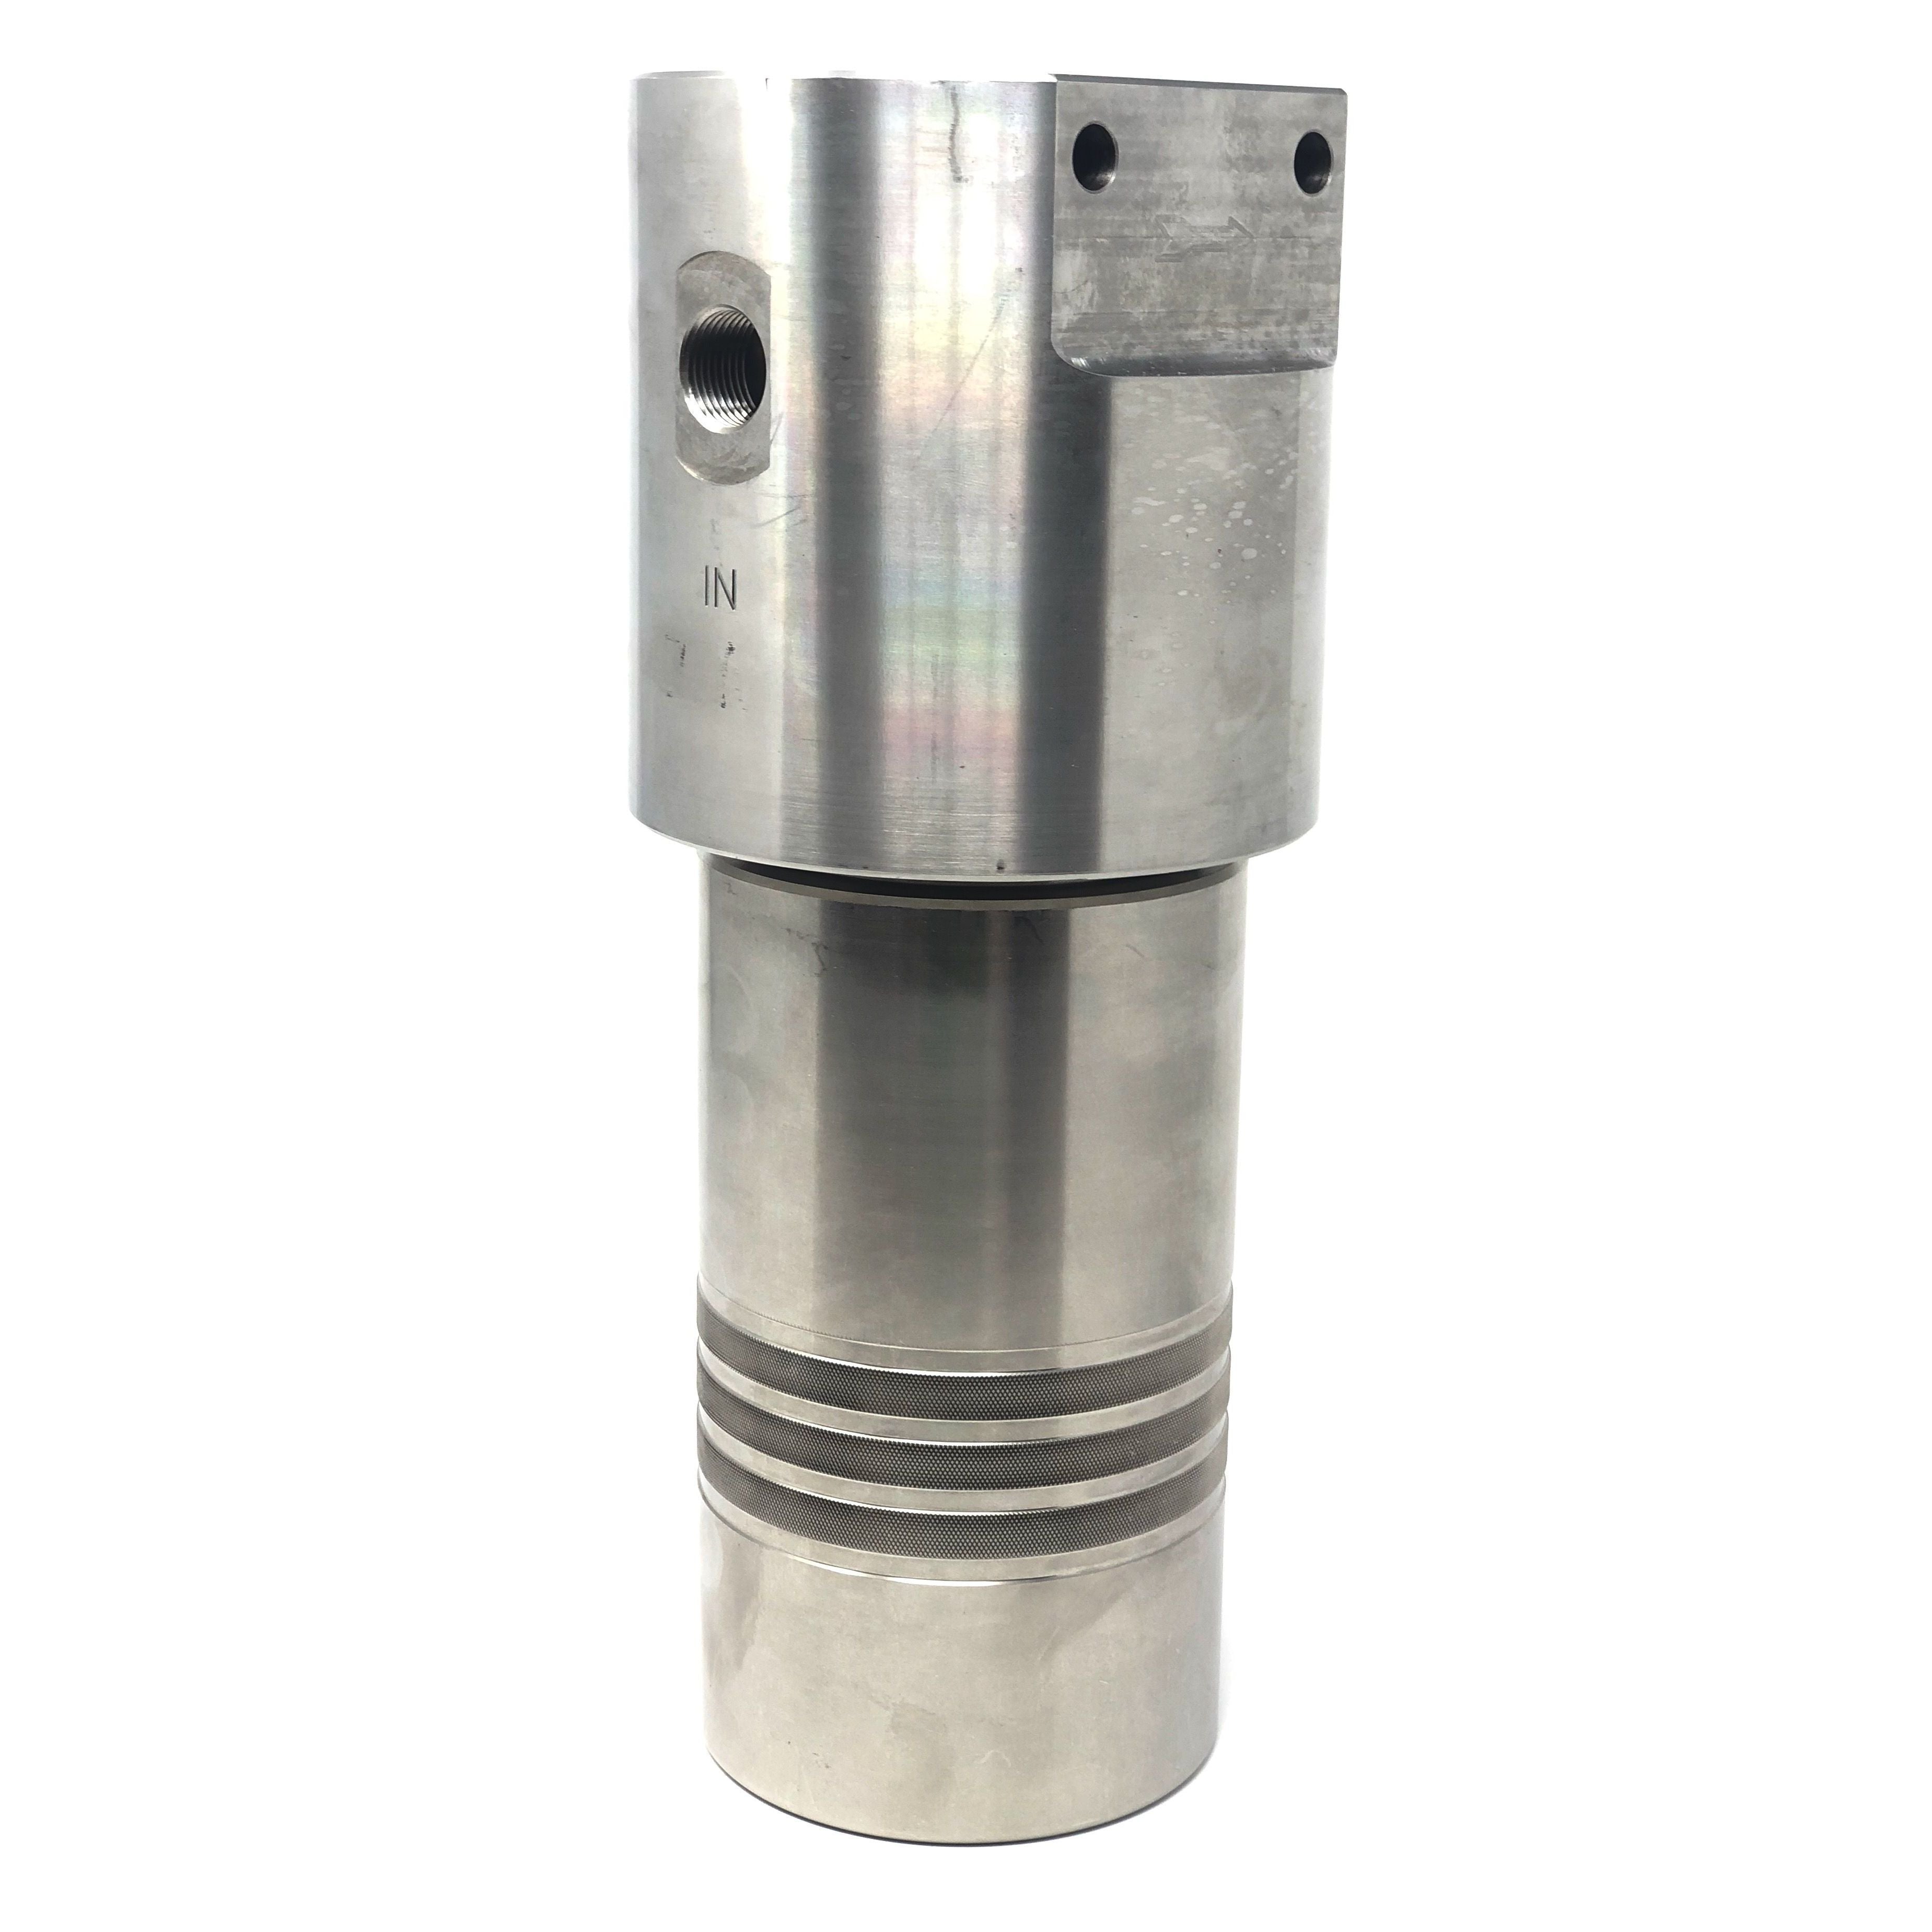 52S-246N-3MDN : Chase Ultra High Pressure Inline Filter, 10000psi, 3/8" NPT, 3 Micron, With Visual Indicator, No Bypass